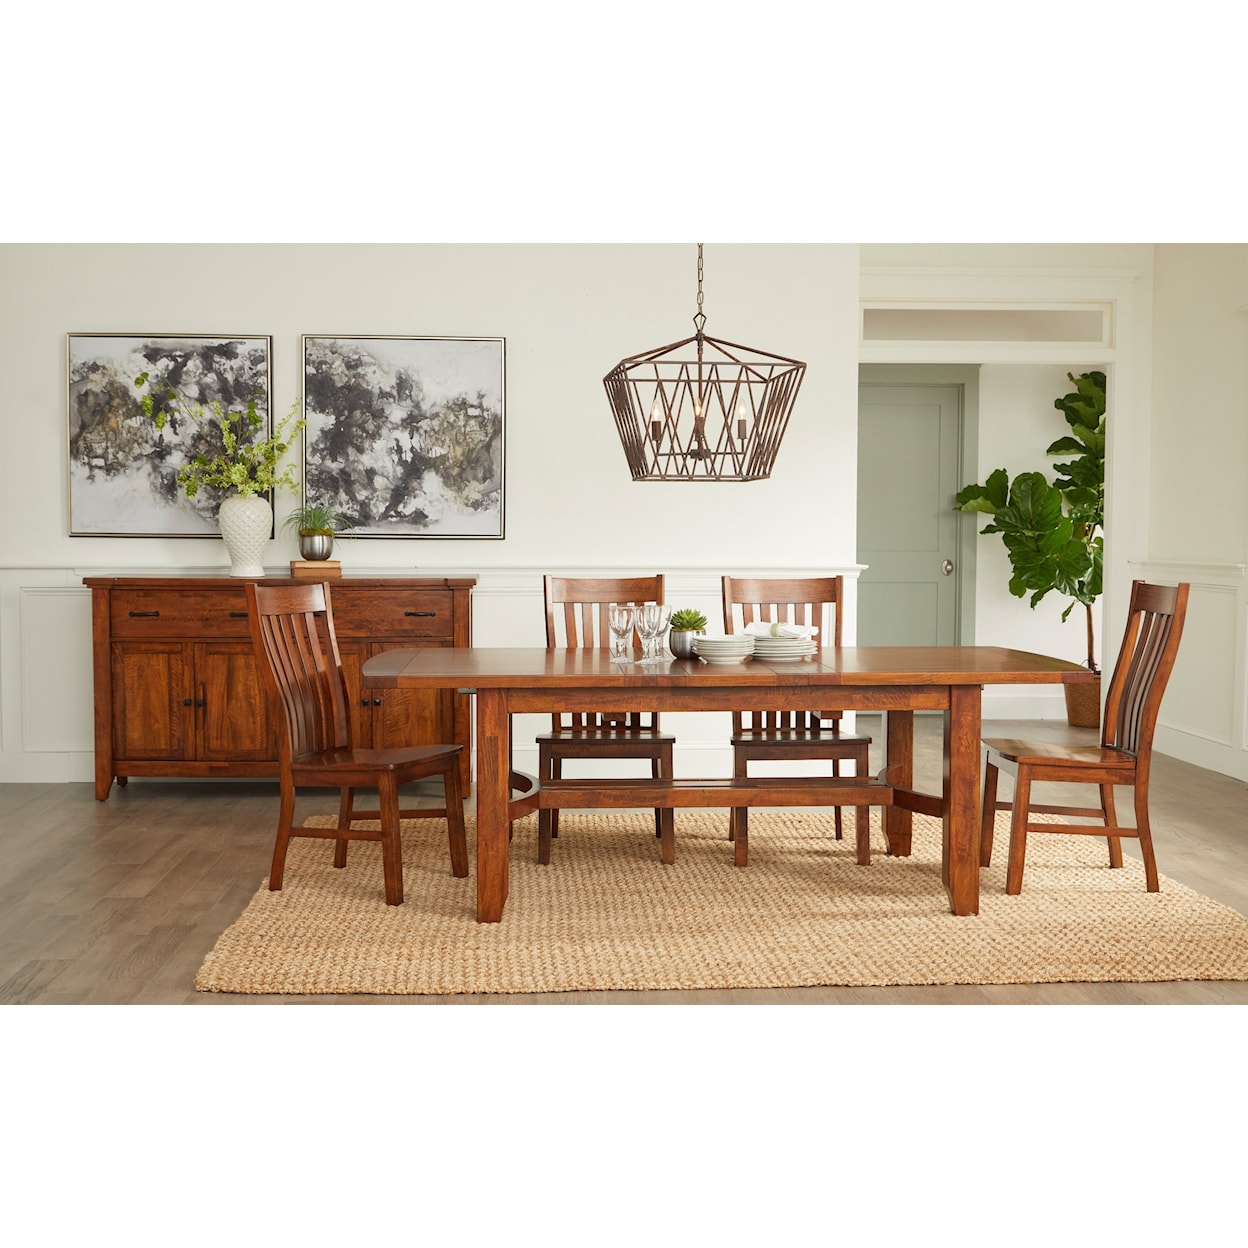 Warehouse M Whistler Retreat Dining Table